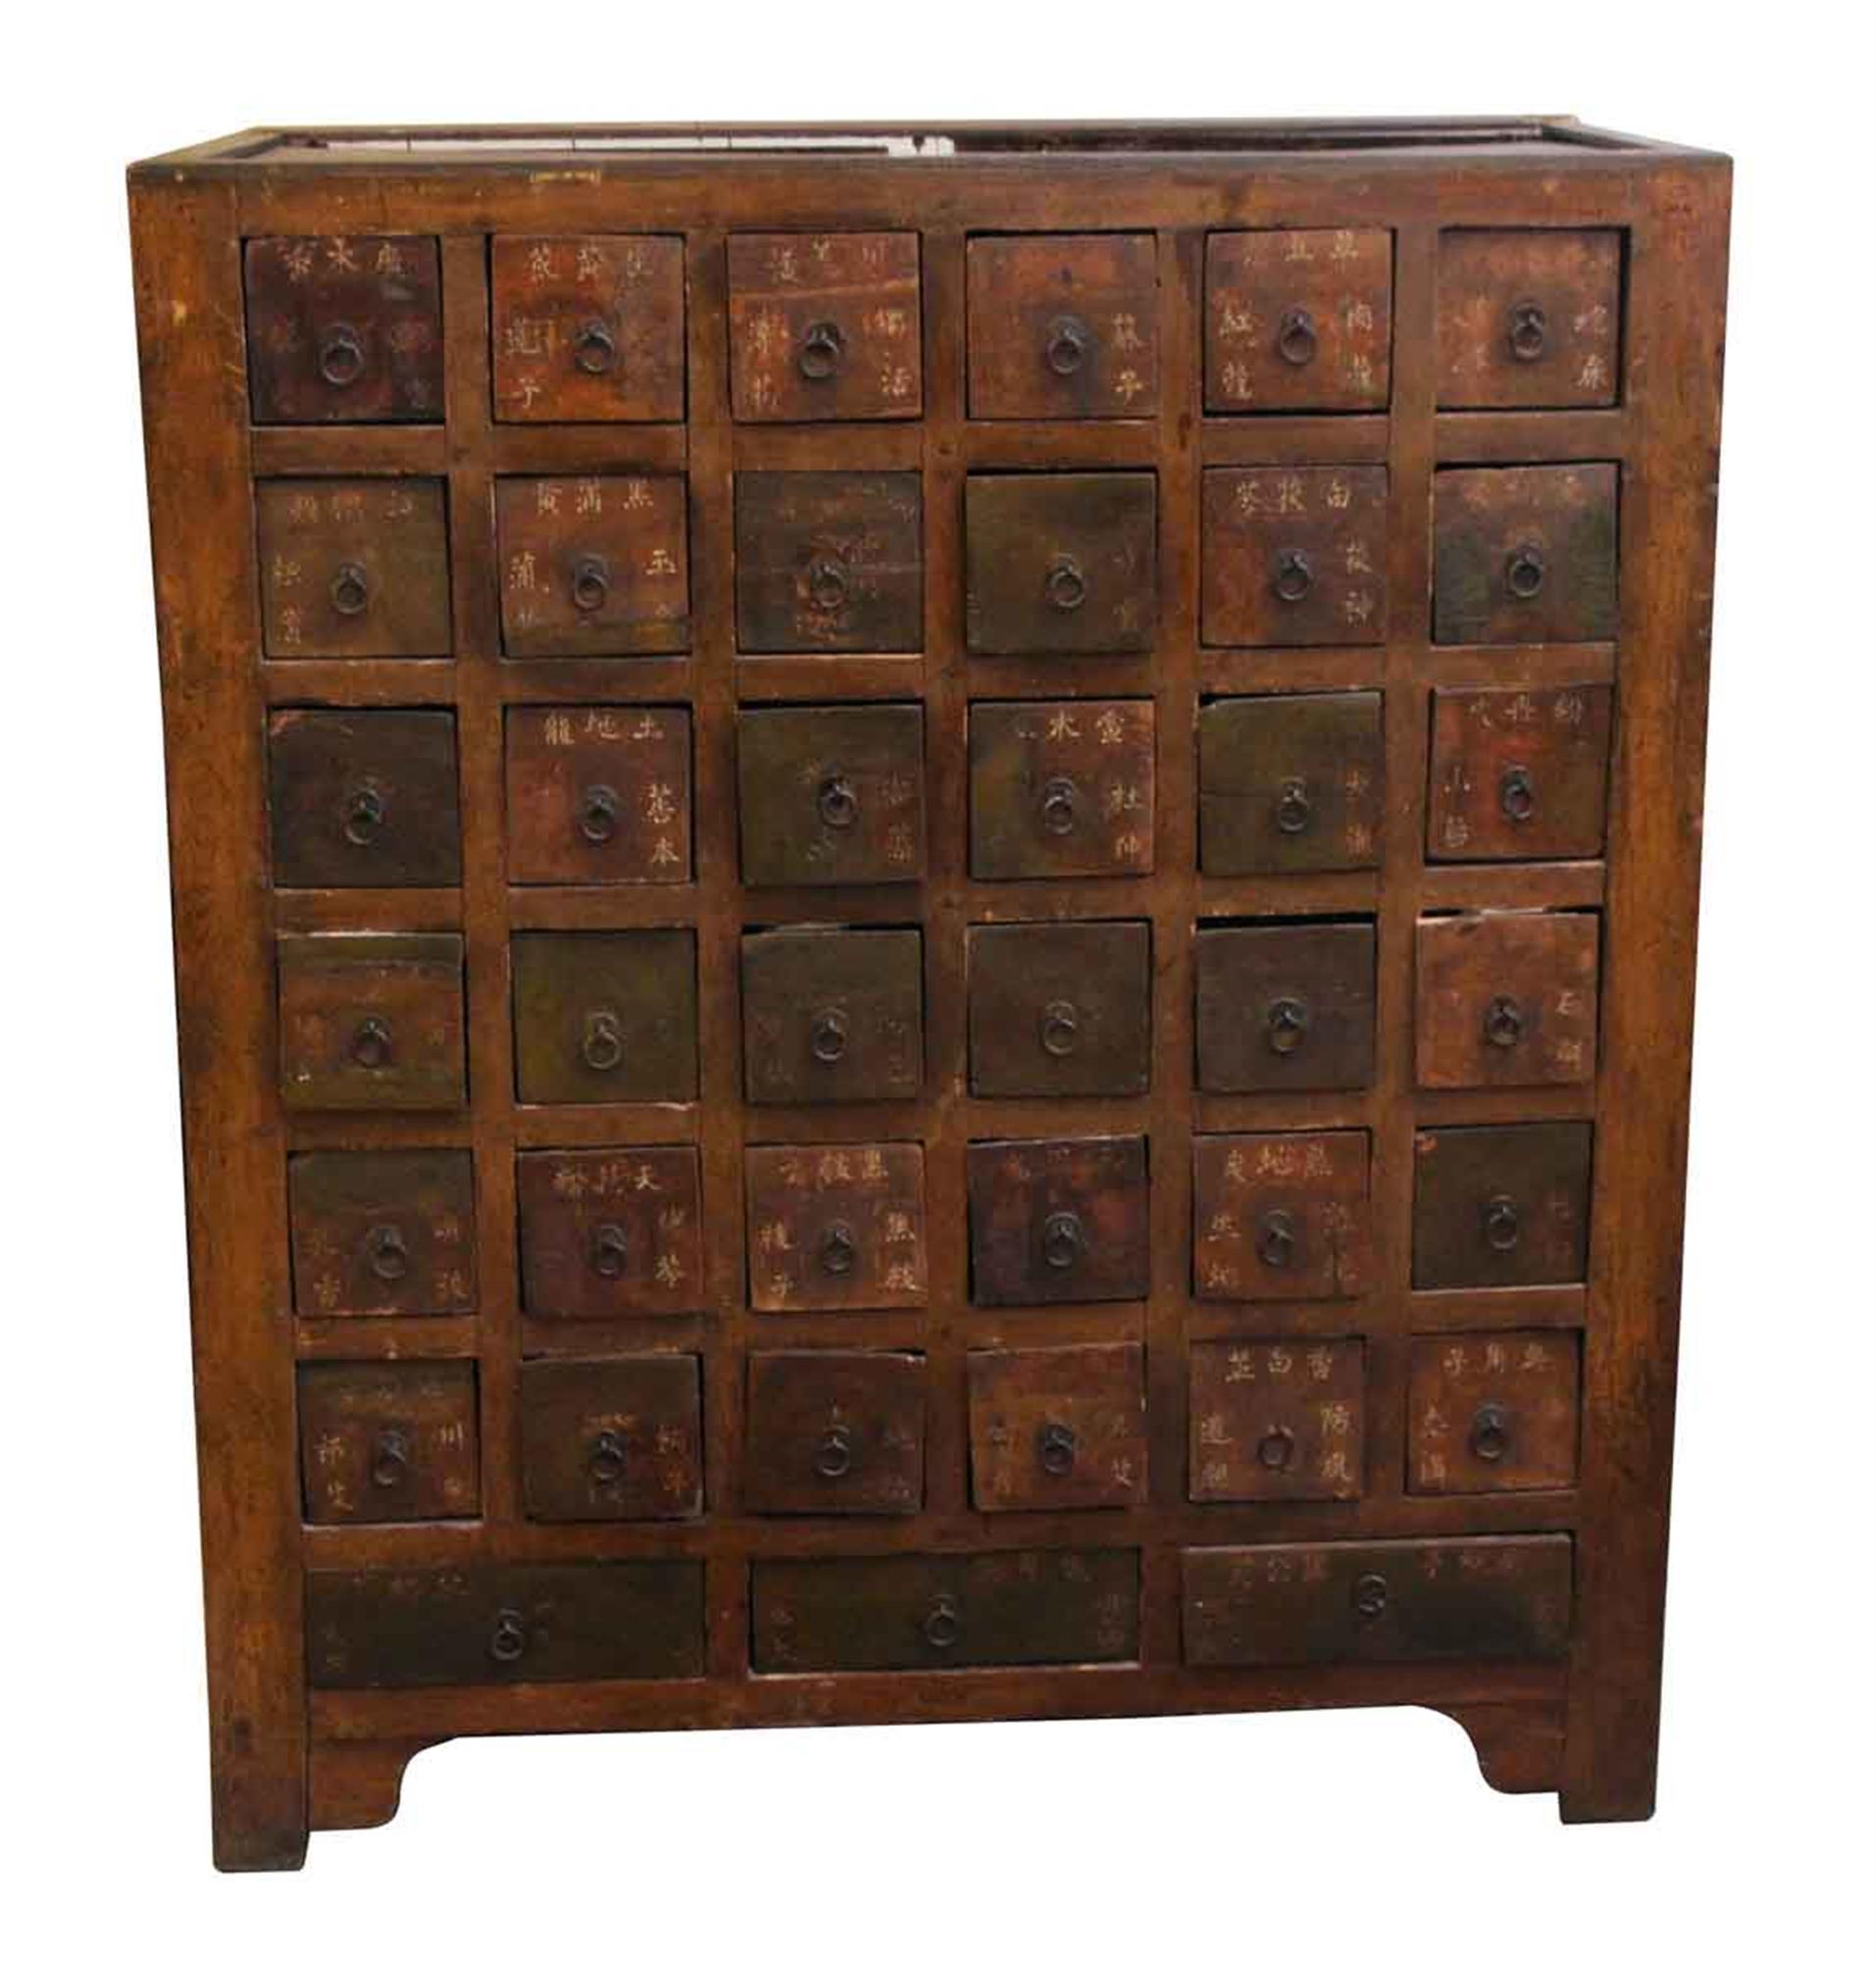 1950s Chinese Wood Apothecary Cabinet With 36 Drawers For Sale At